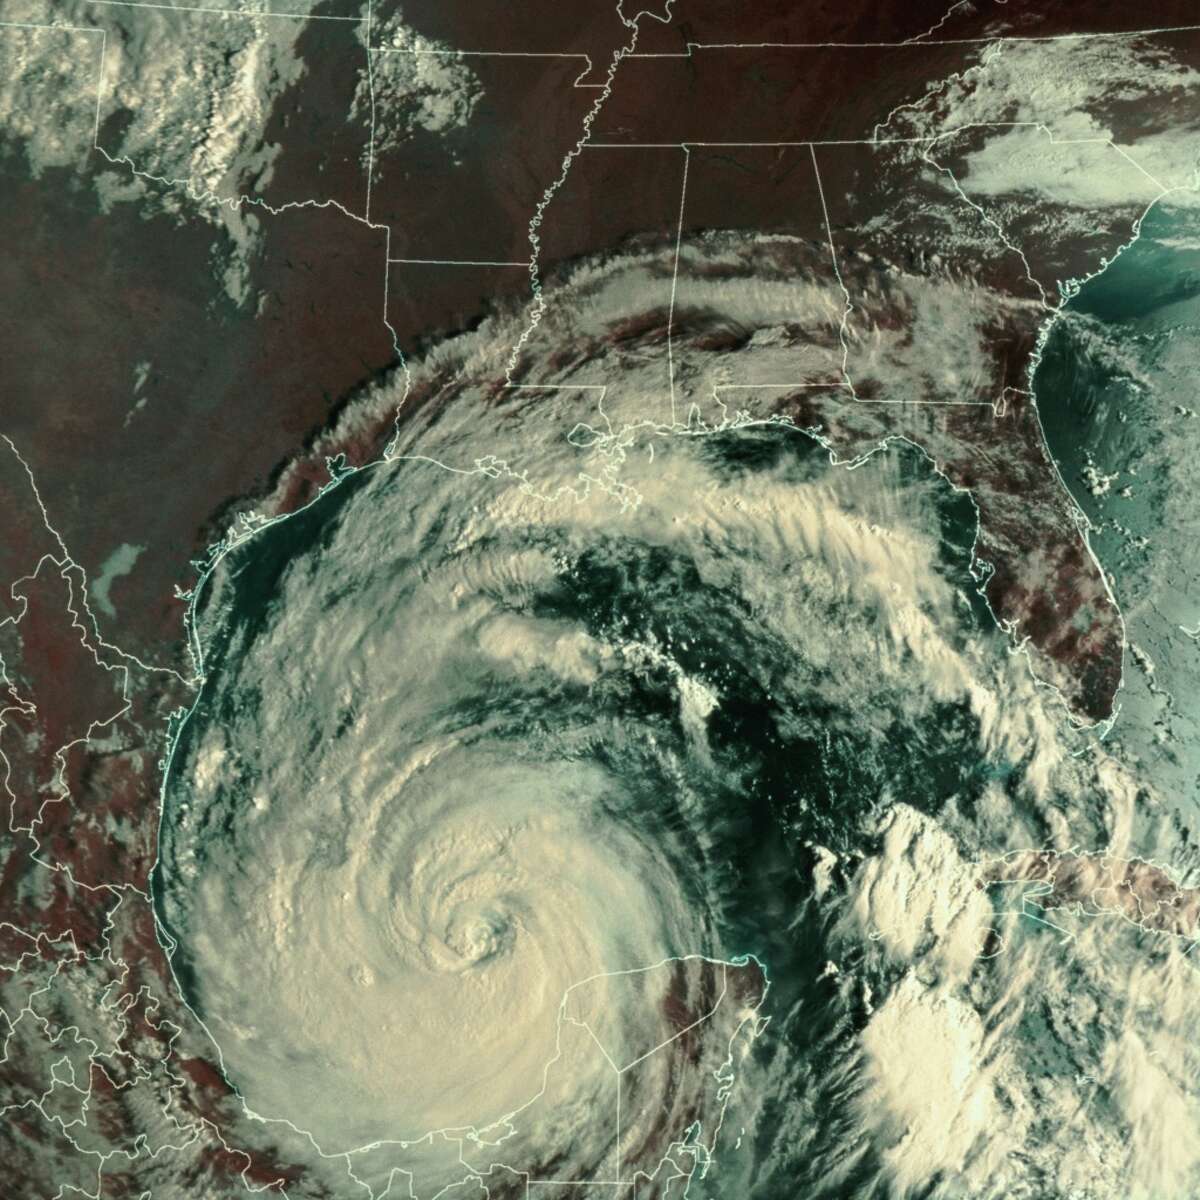 For some reason, many weather watchers start to slowly give up on the hurricane season after Labor Day, but the end of the summer season is rarely the end of hurricane season for Texas. The state has been battered on dozens of occasions with hurricanes and tropical storms well into October. Here are some of the state's worst late-season hurricanes.